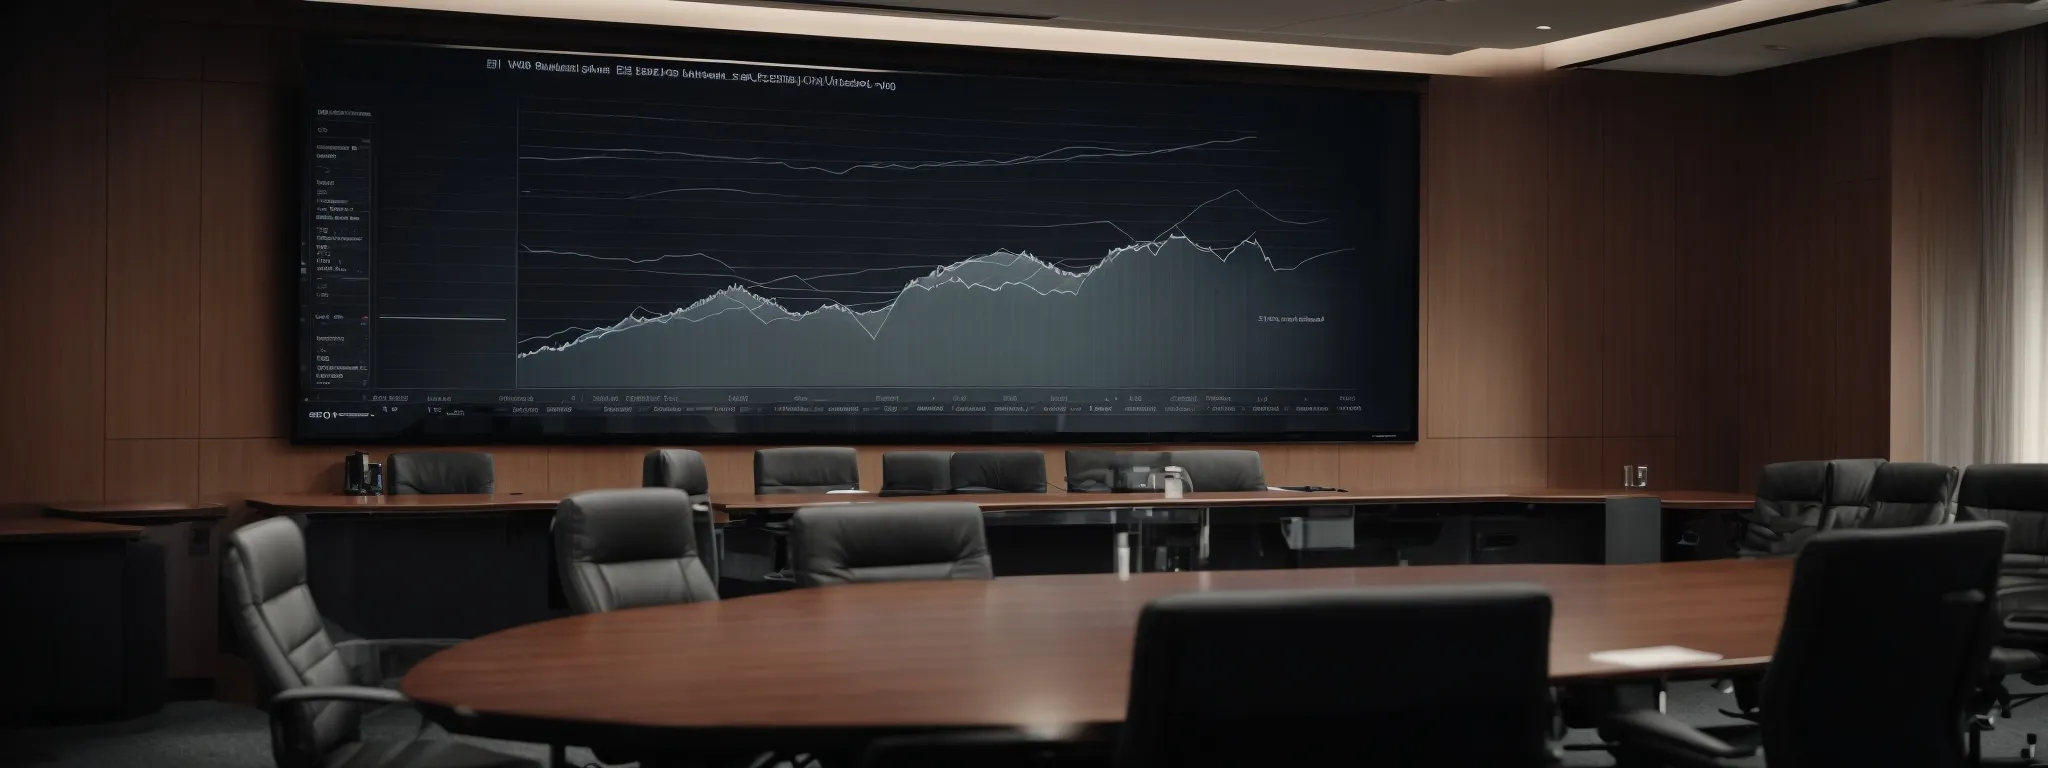 a conference room with a large screen displaying a graph, reflecting the dynamic changes in seo strategy.